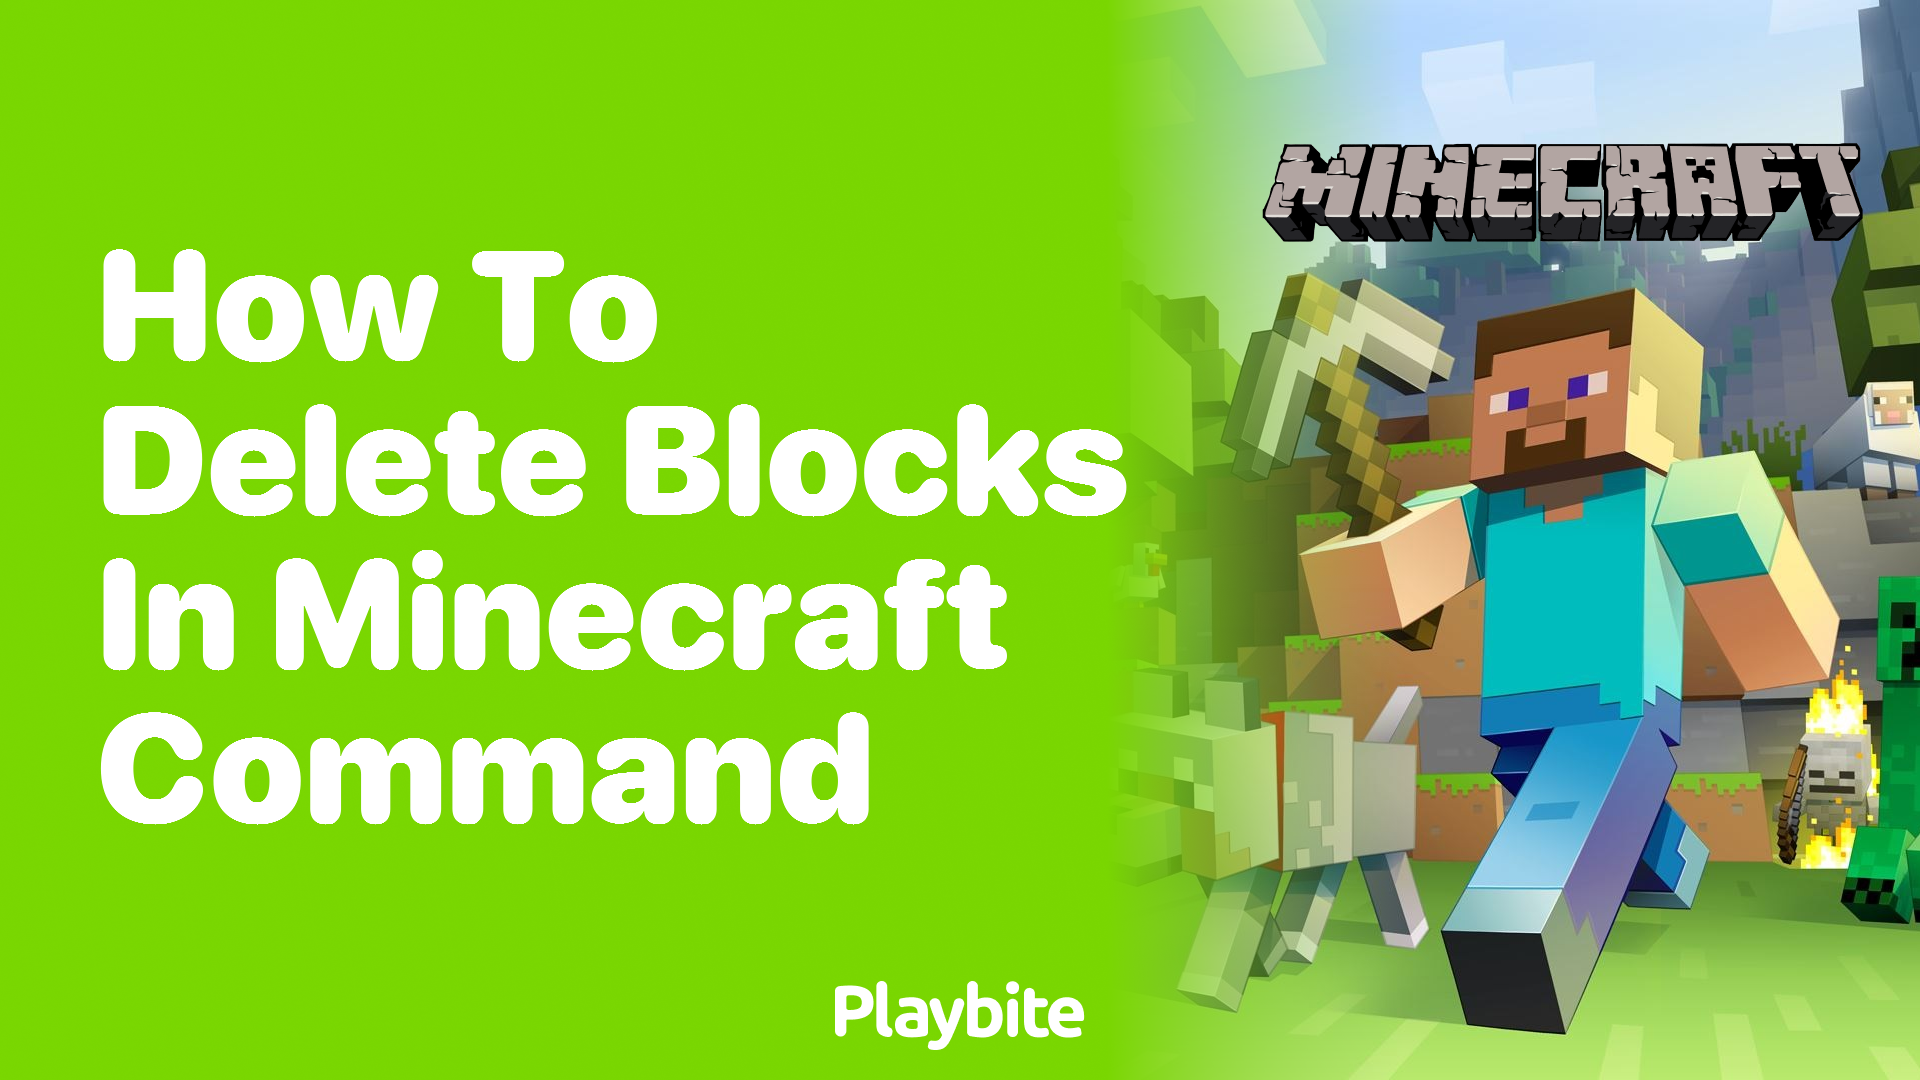 How to Delete Blocks in Minecraft Using Commands